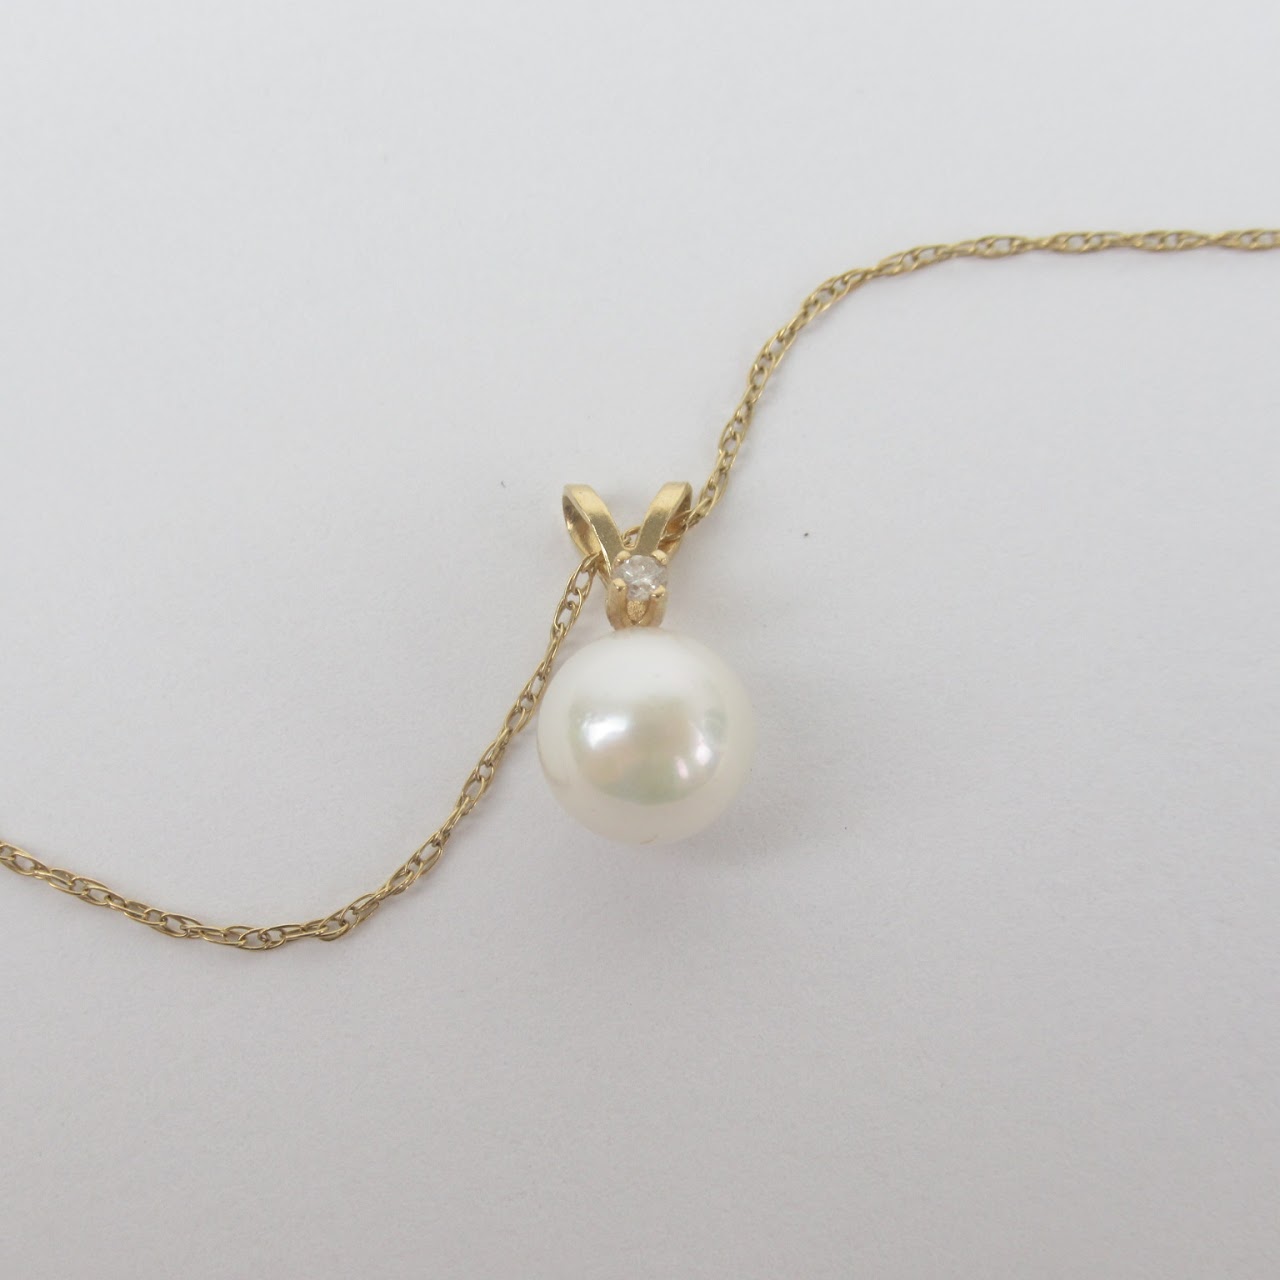 14K Gold, Diamond, and Pearl Pendant Necklace